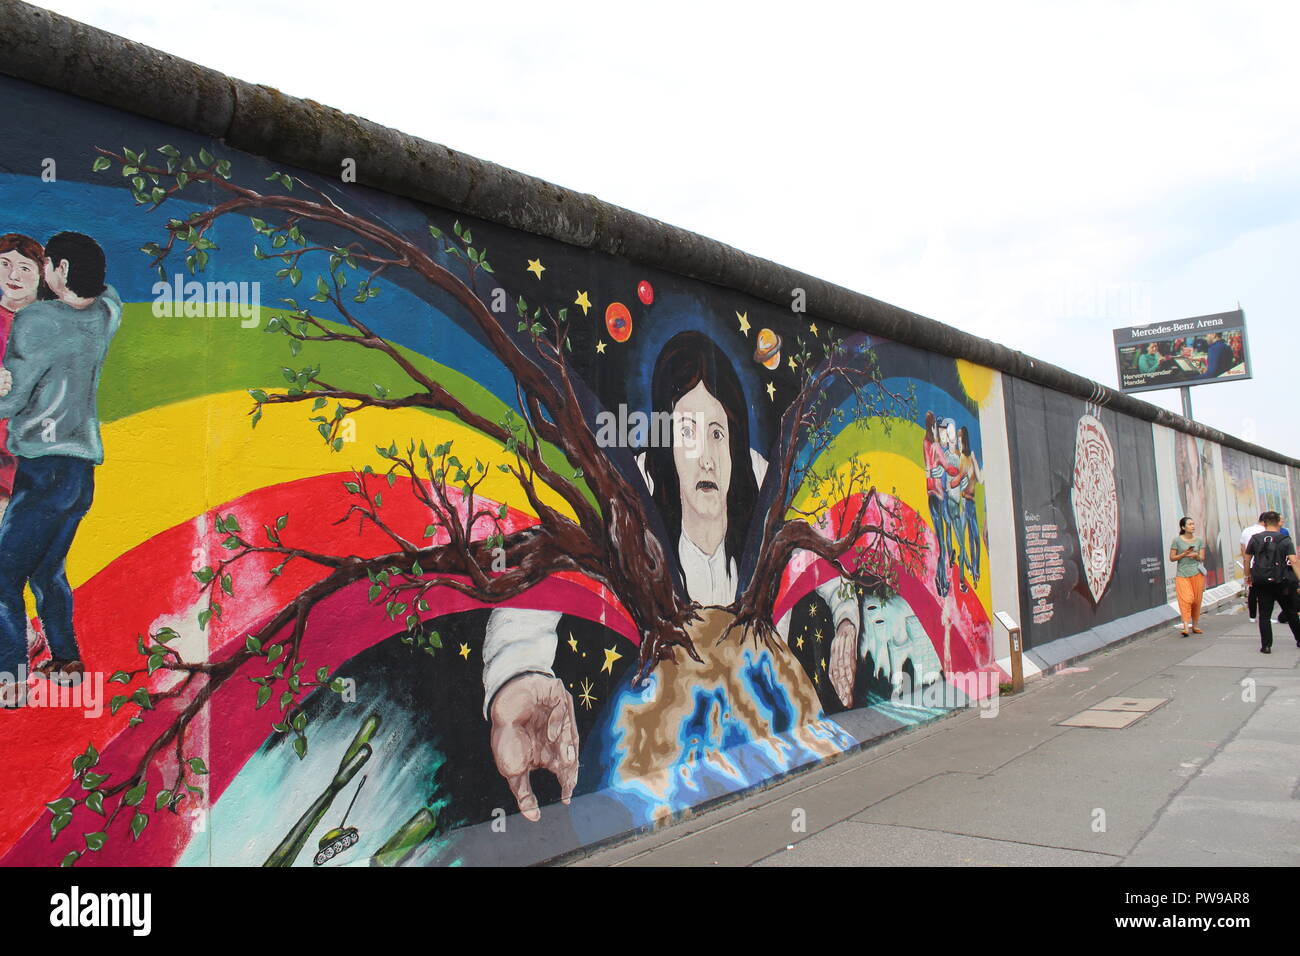 East Side Gallery - Berlin Wall - Europe's Spring painting by Catrin Resch with tourists in the background looking at another painting - Mother Nature Stock Photo